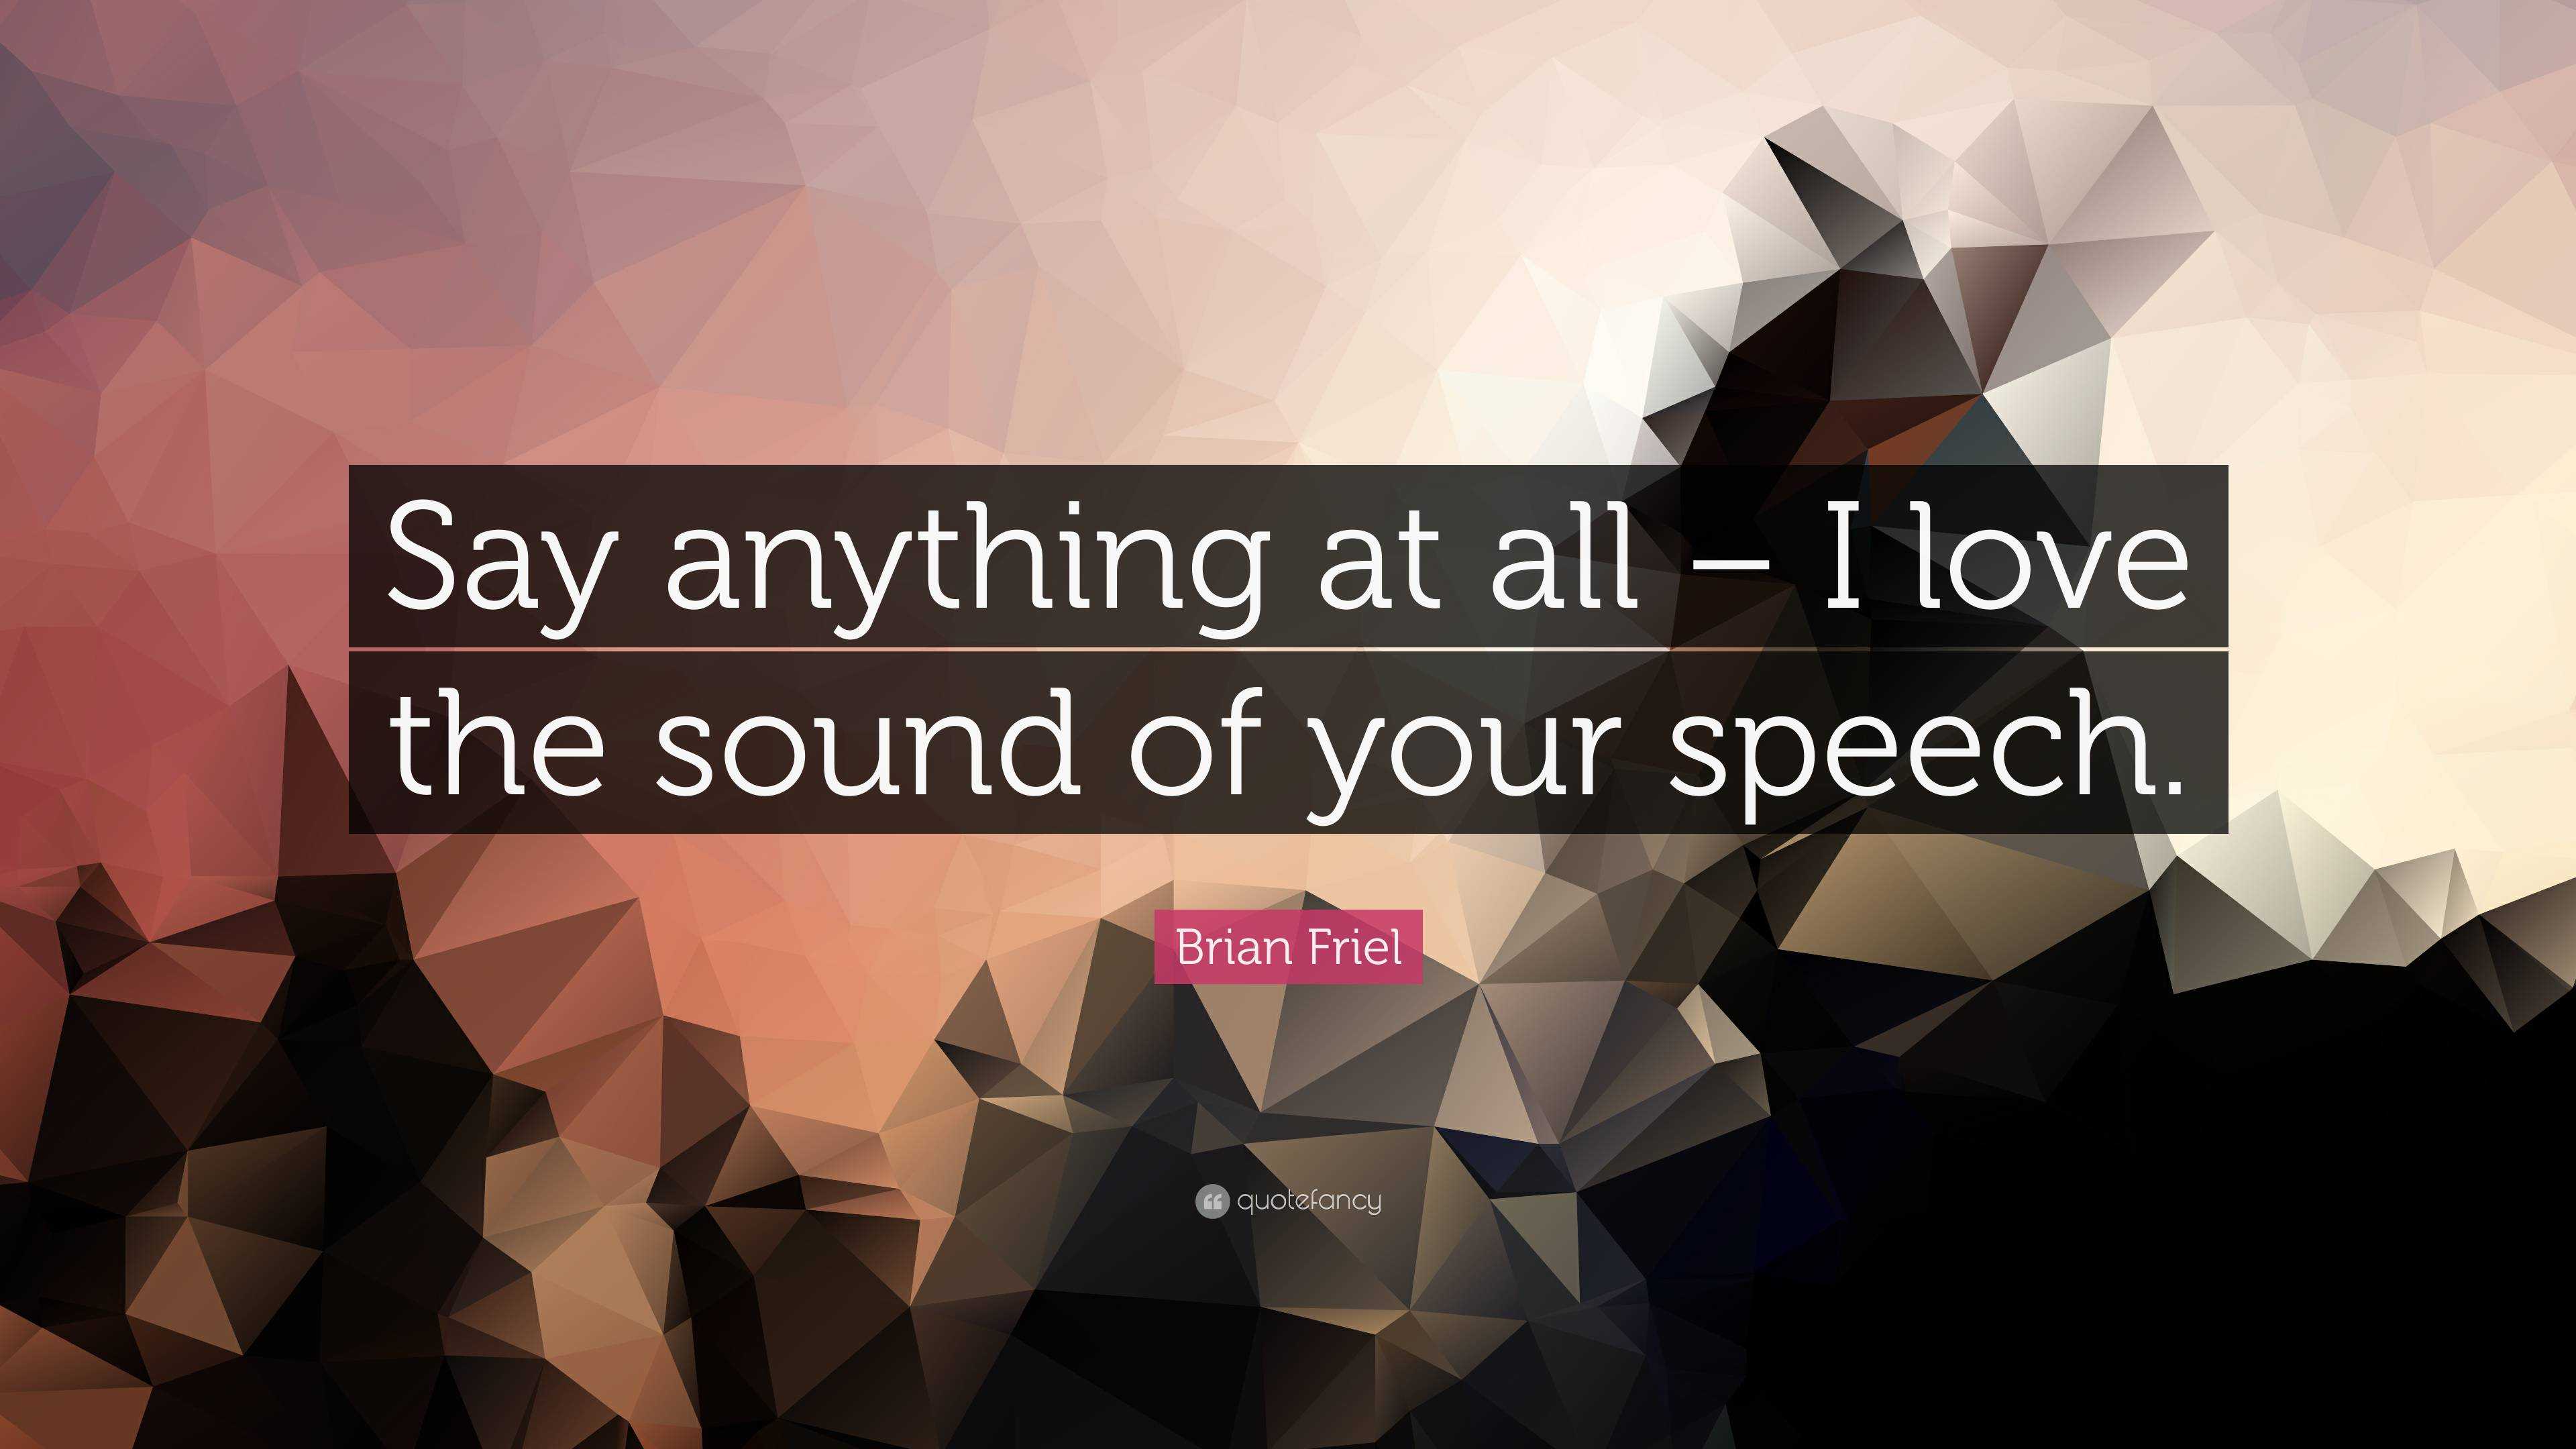 Brian Friel Quote: “Say anything at all – I love the sound of your speech.”